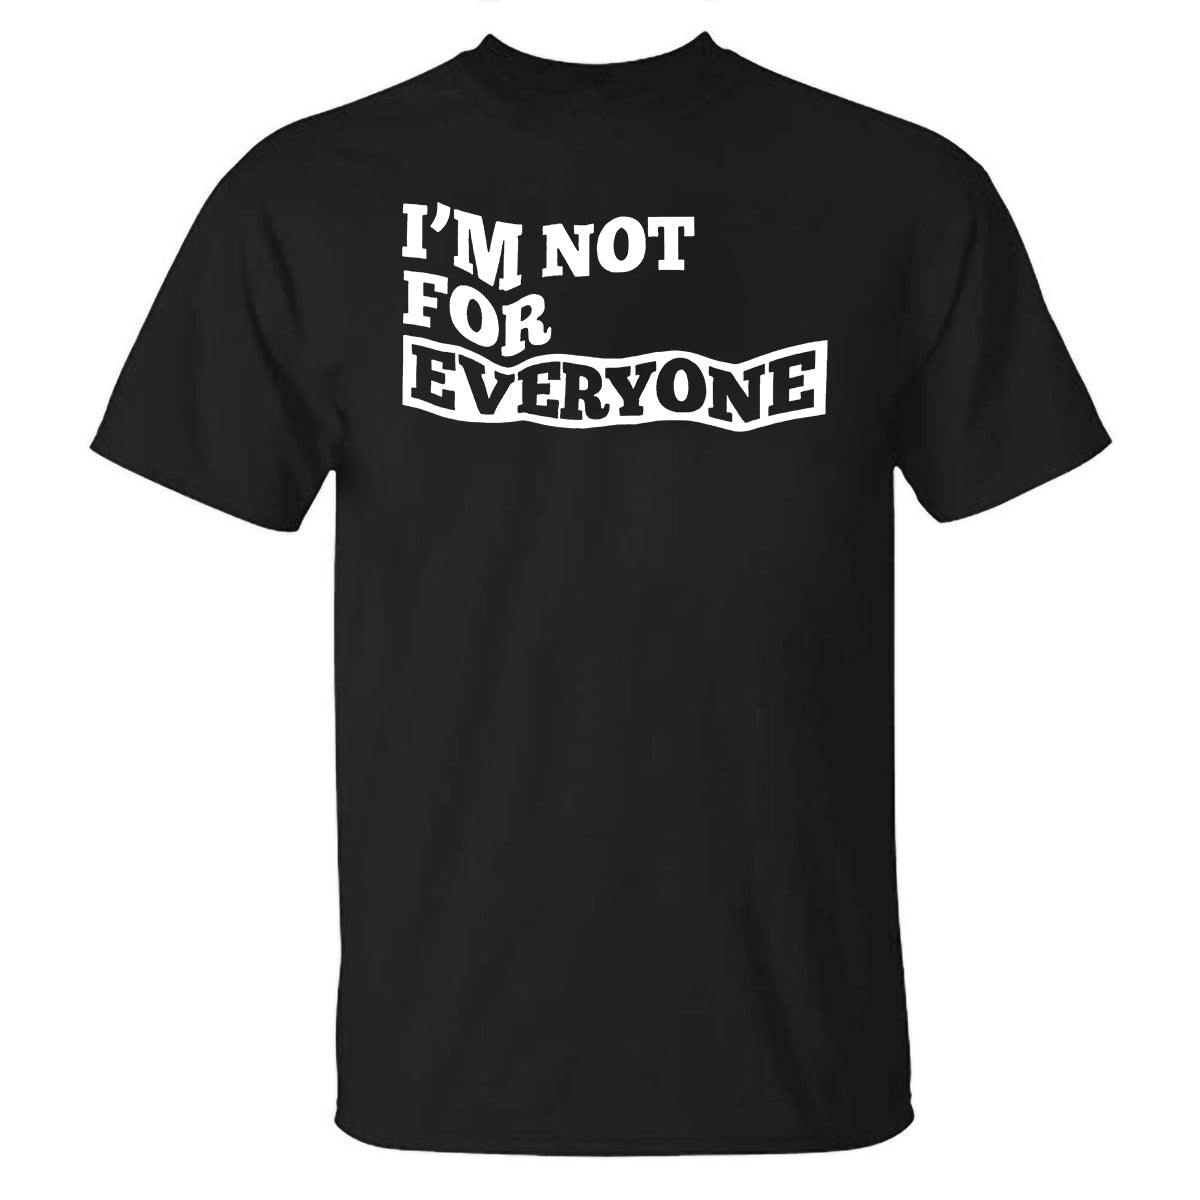 I'm Not For Everyone Printed T-shirt